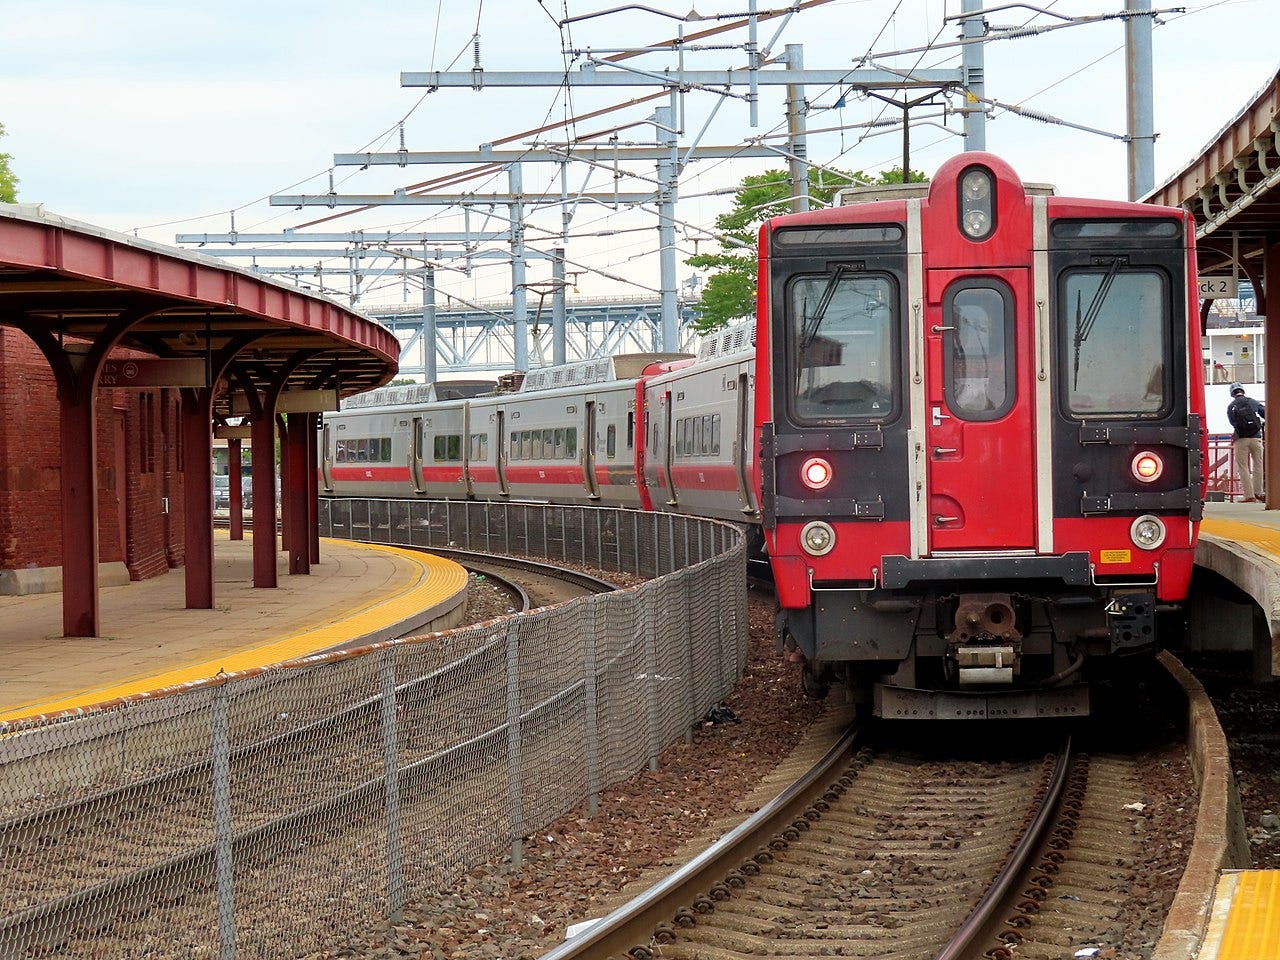 A train of electric railcars at a station